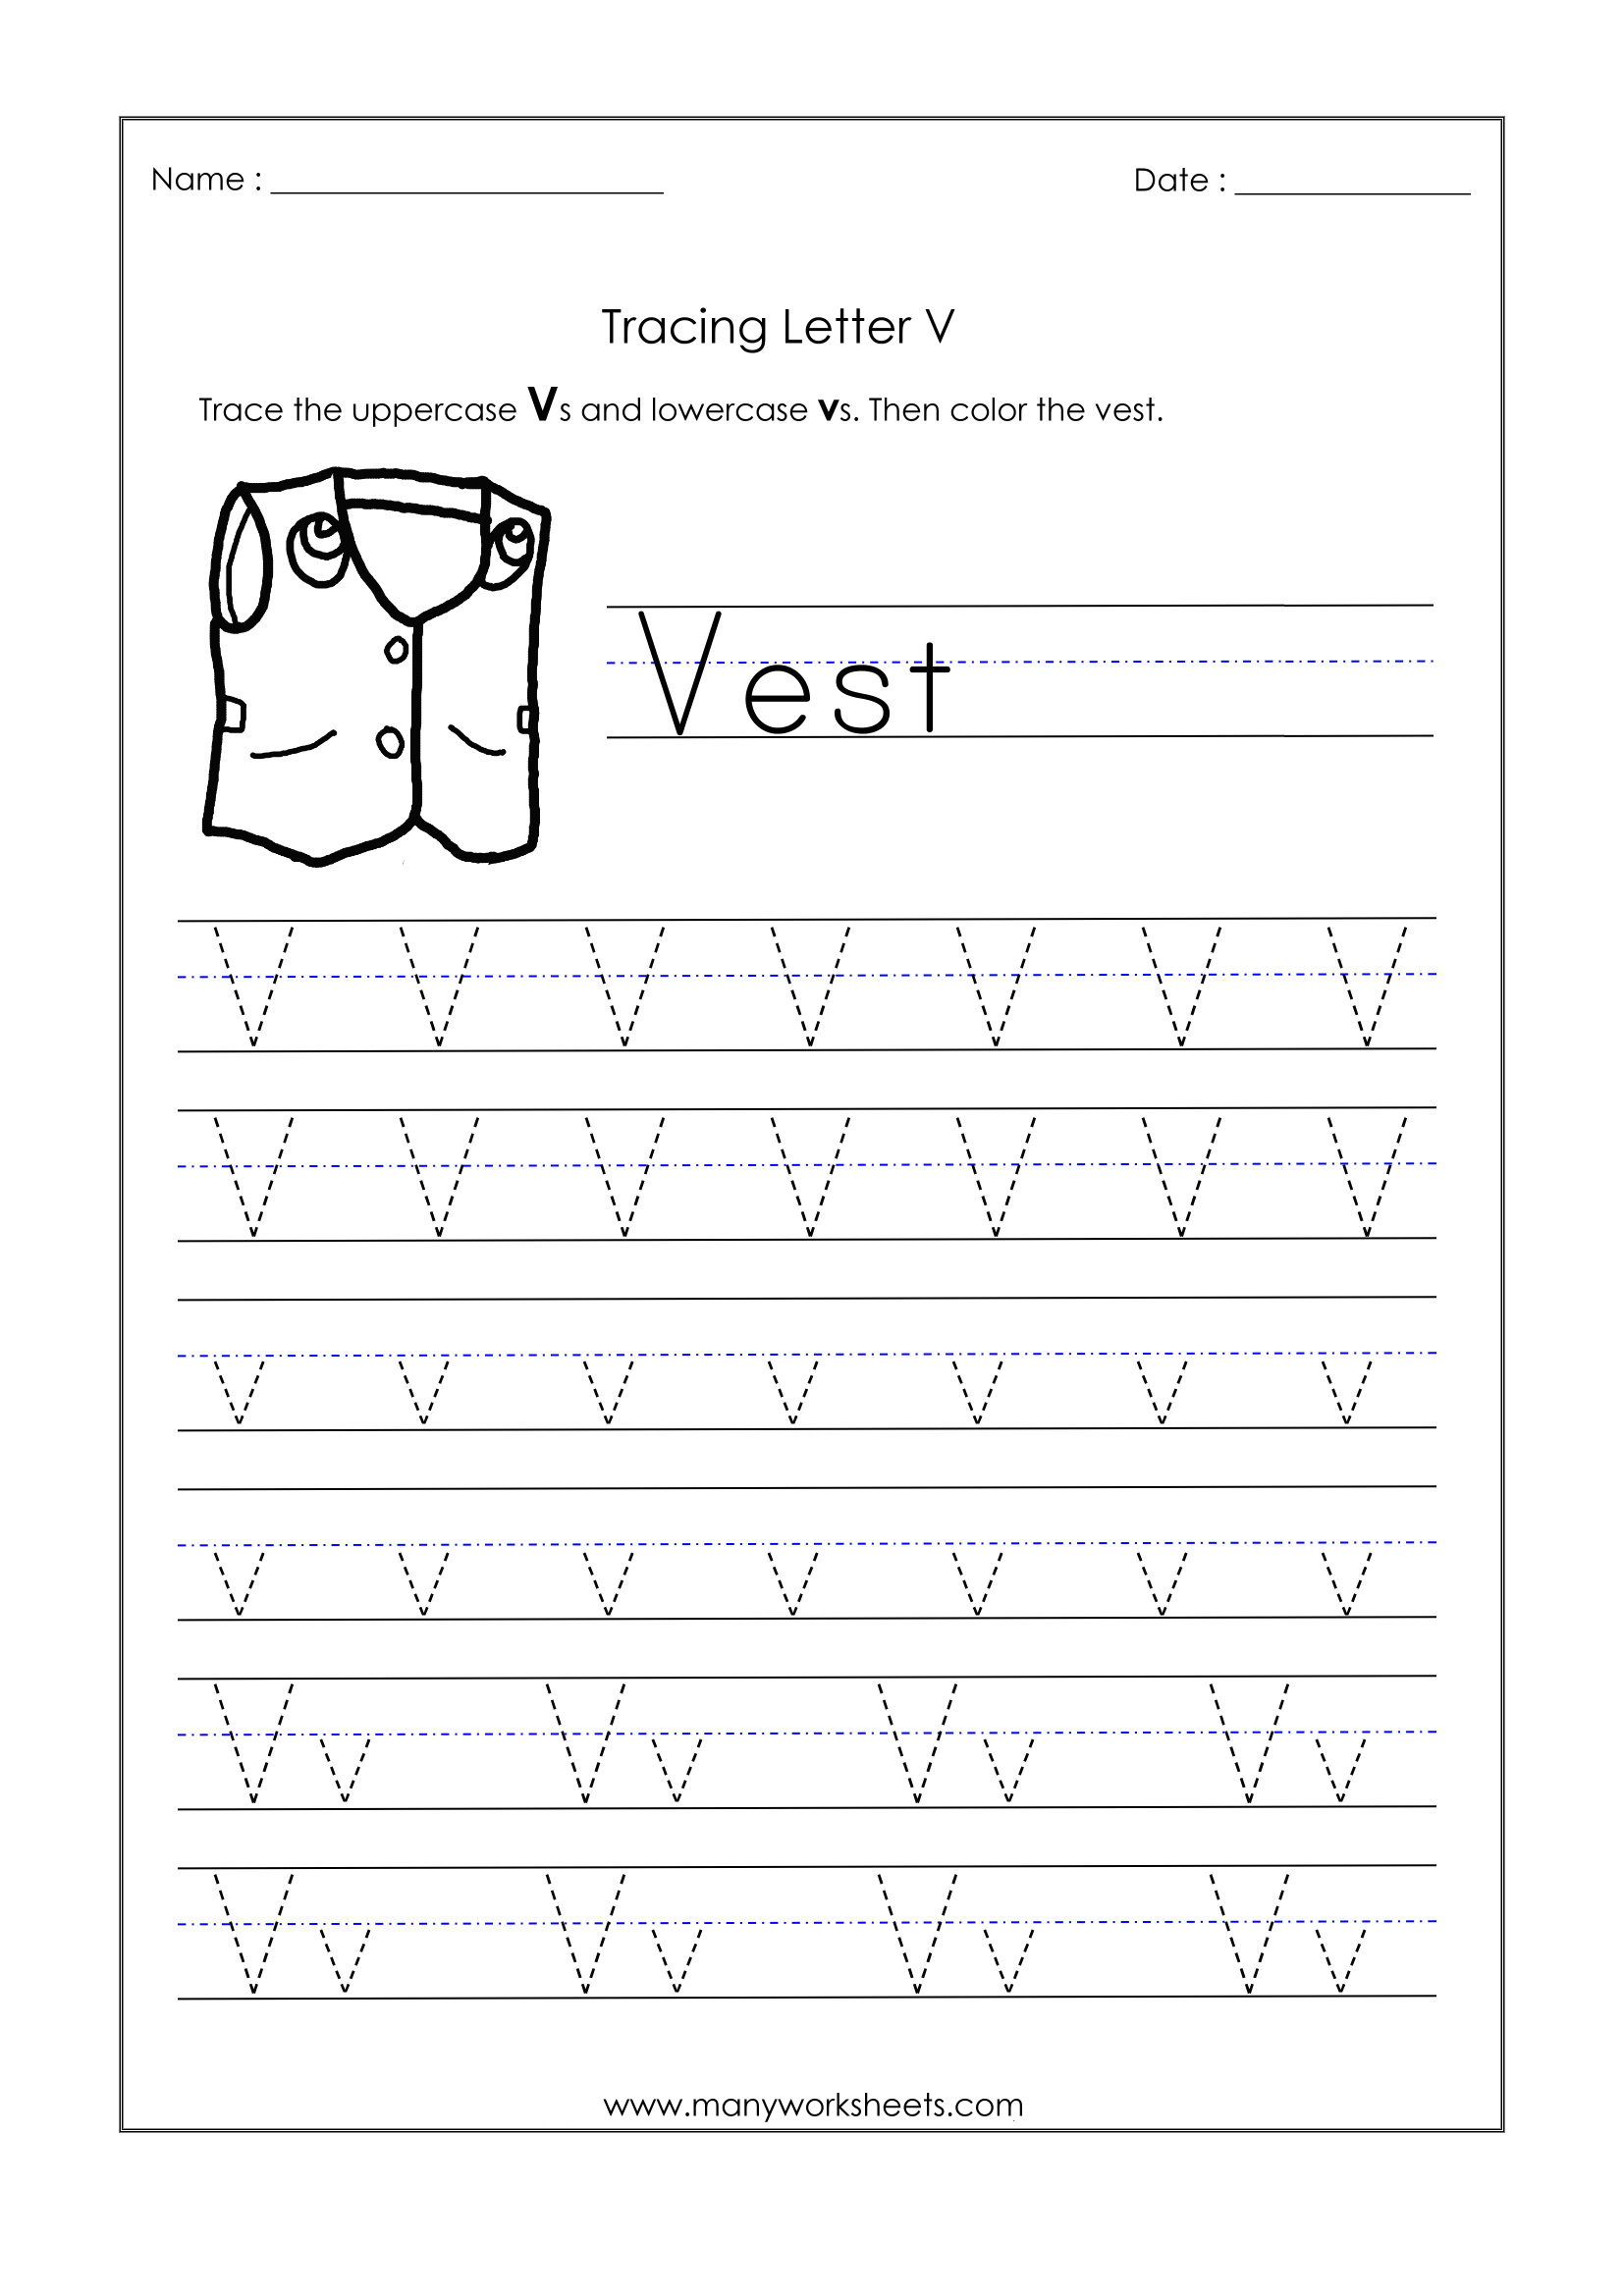 English For Kids Step By Step Letter Tracing Worksheets Letter V Worksheets To Print Activity 